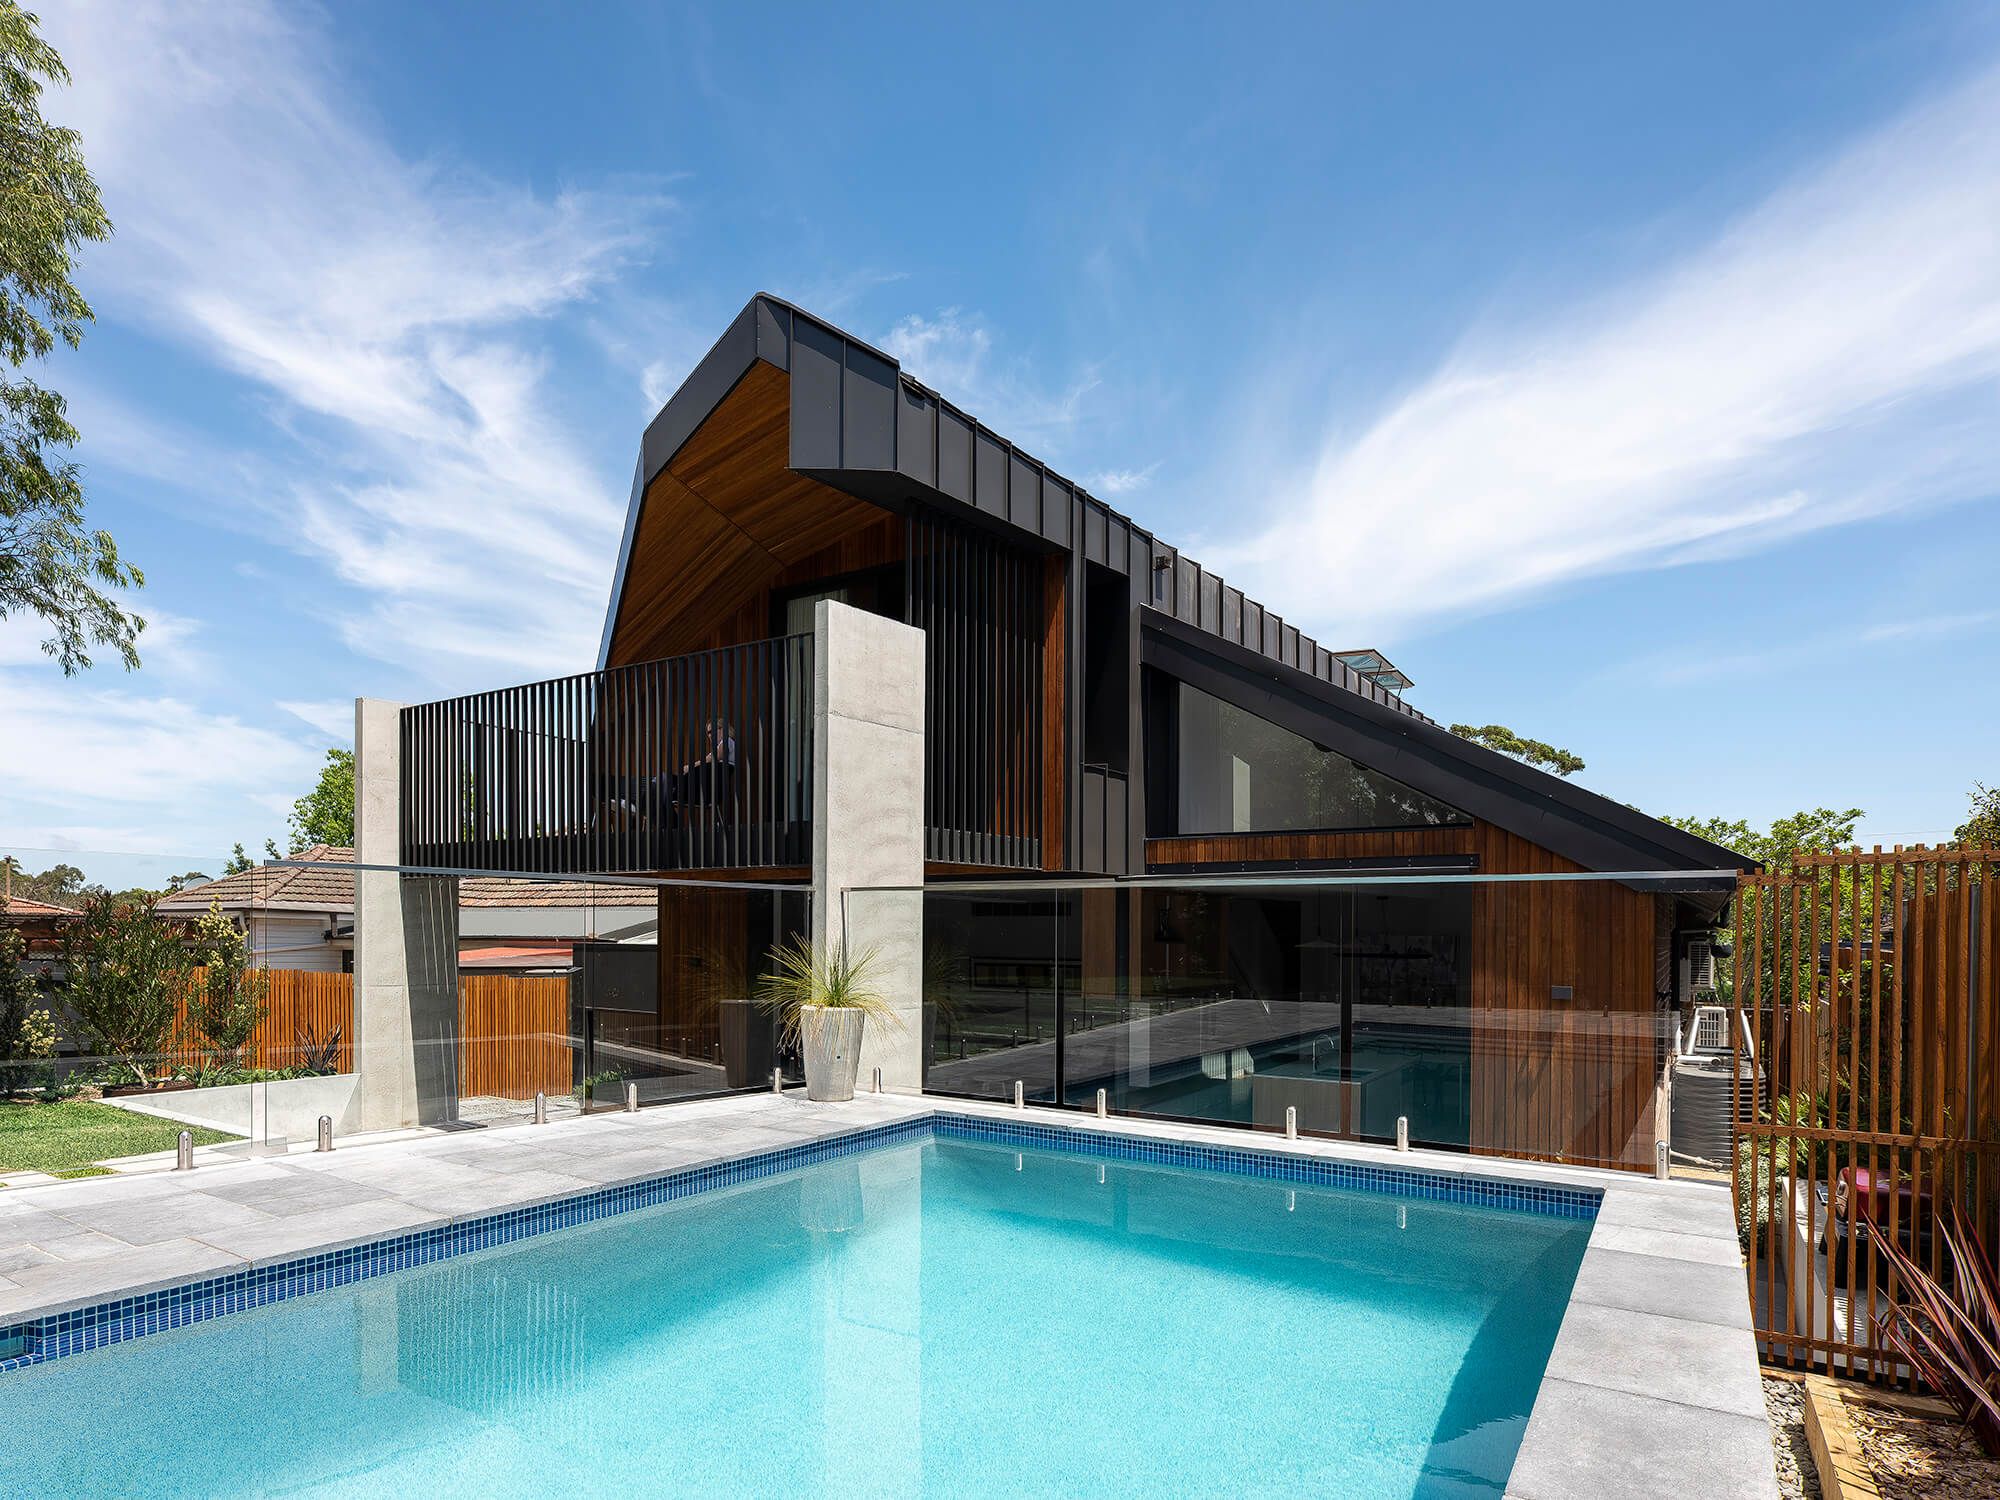 Stealth House by Bijl Architecture. View of rear extention from pool area.